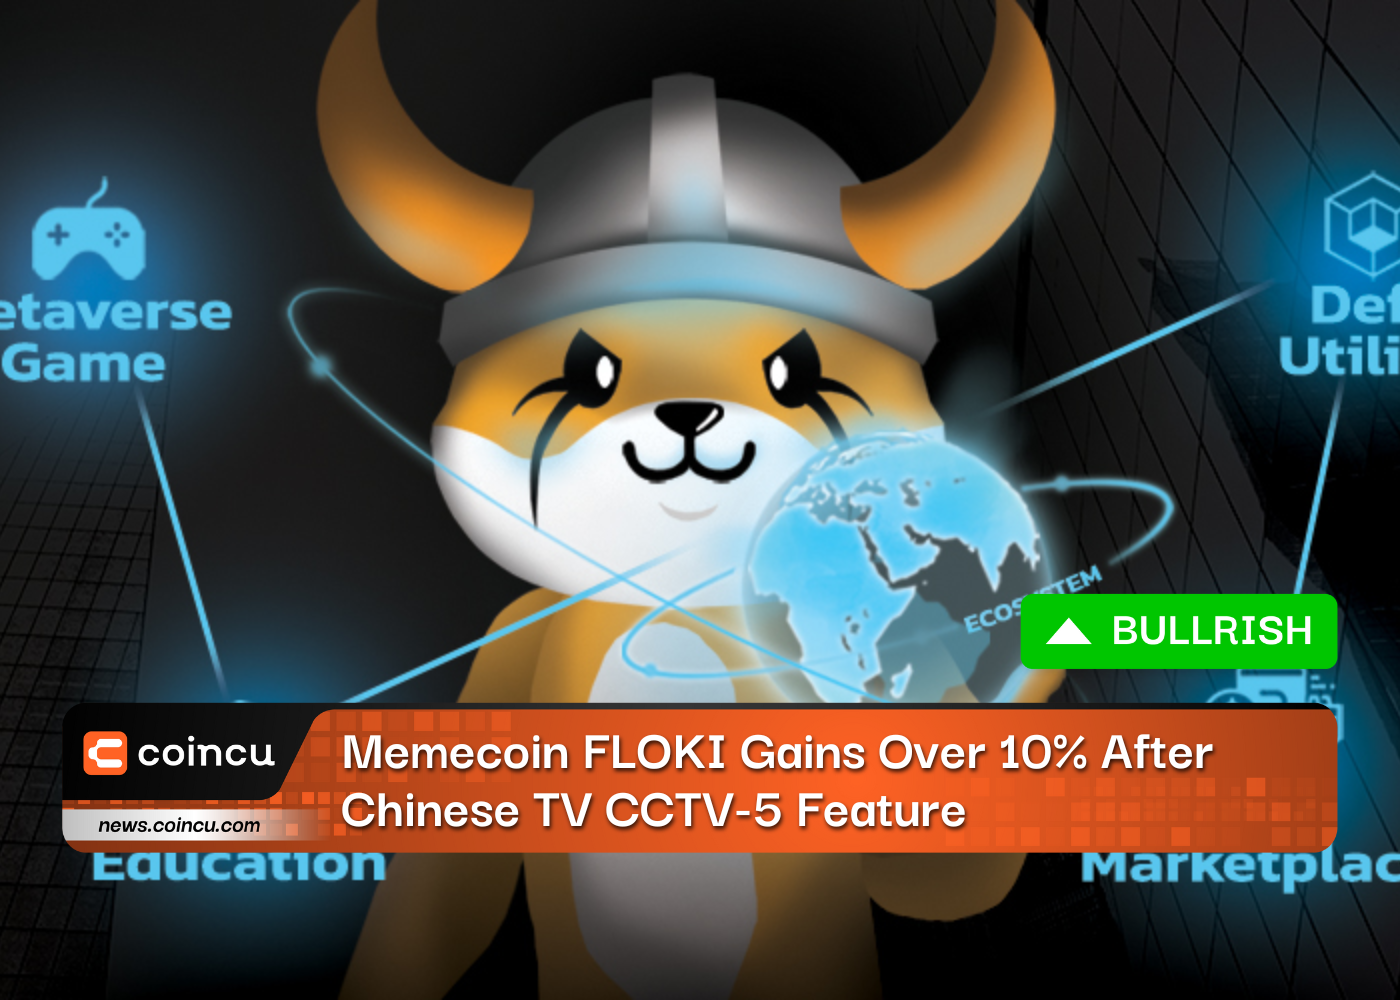 Memecoin FLOKI Gains Over 10% After Chinese TV CCTV-5 Feature